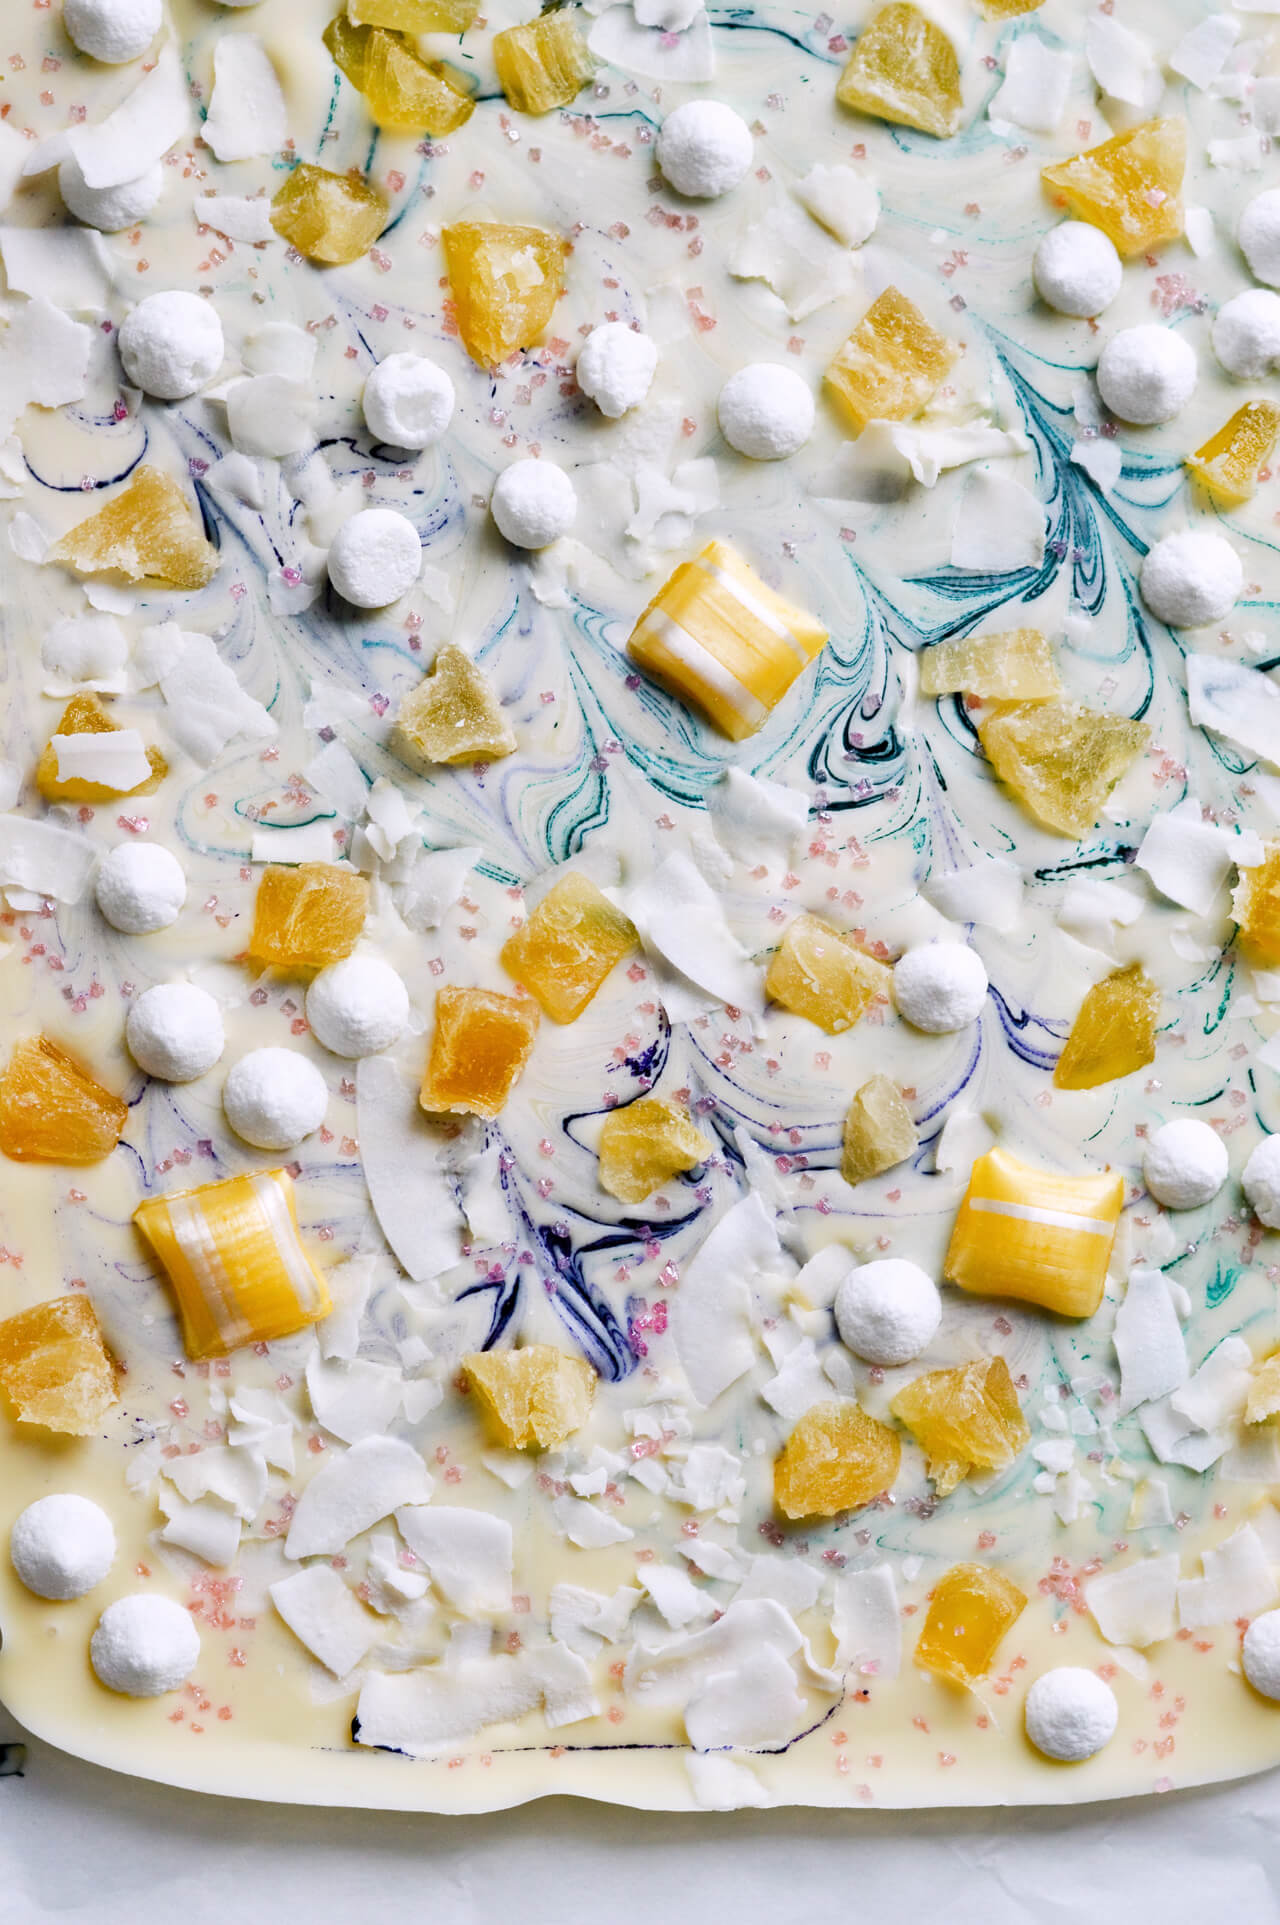 Tropical white chocolate bark with meringues, candied pineapple, coconut chips and sprinkles! Cute dessert or cake topper.